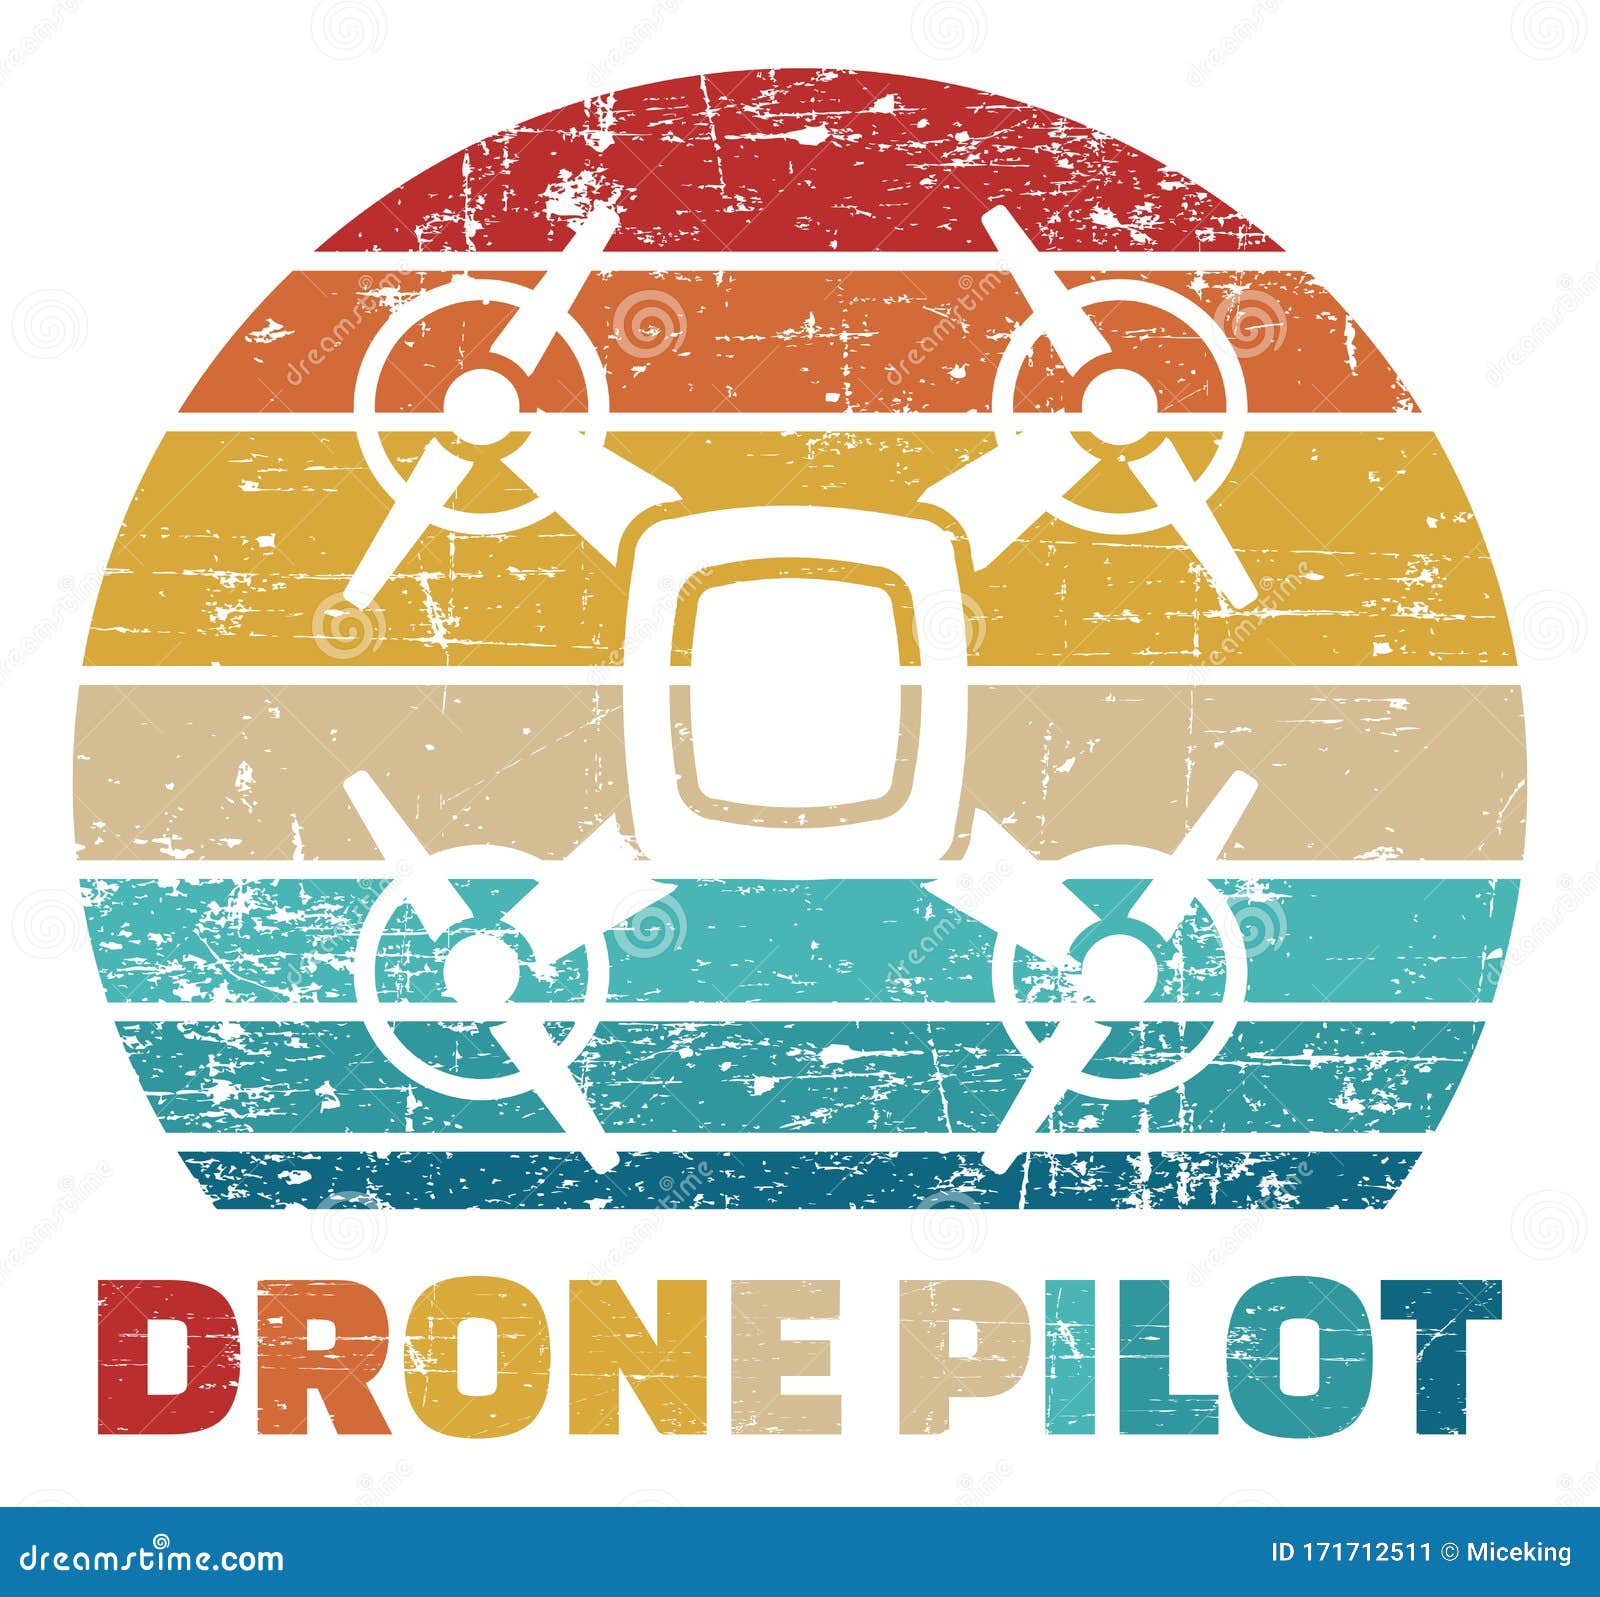 drone pilot icon in vintage colors